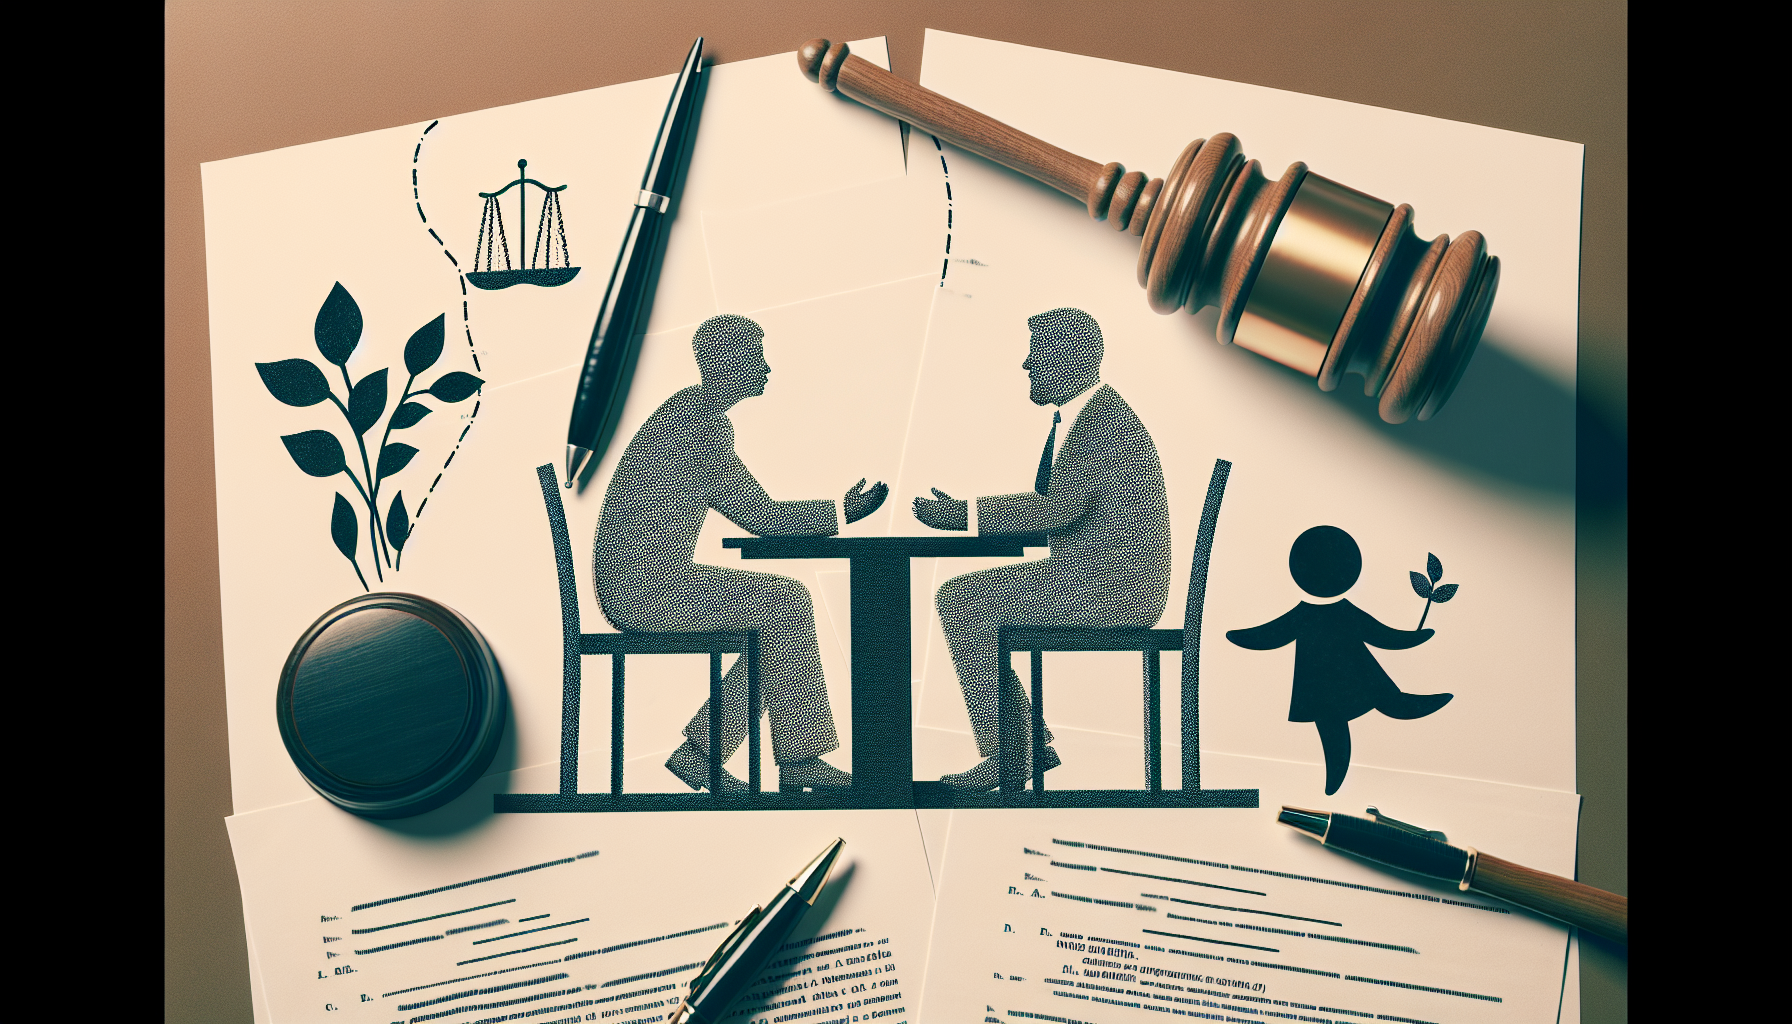 Illustration of legal documents and negotiation representing crafting a parallel parenting agreement